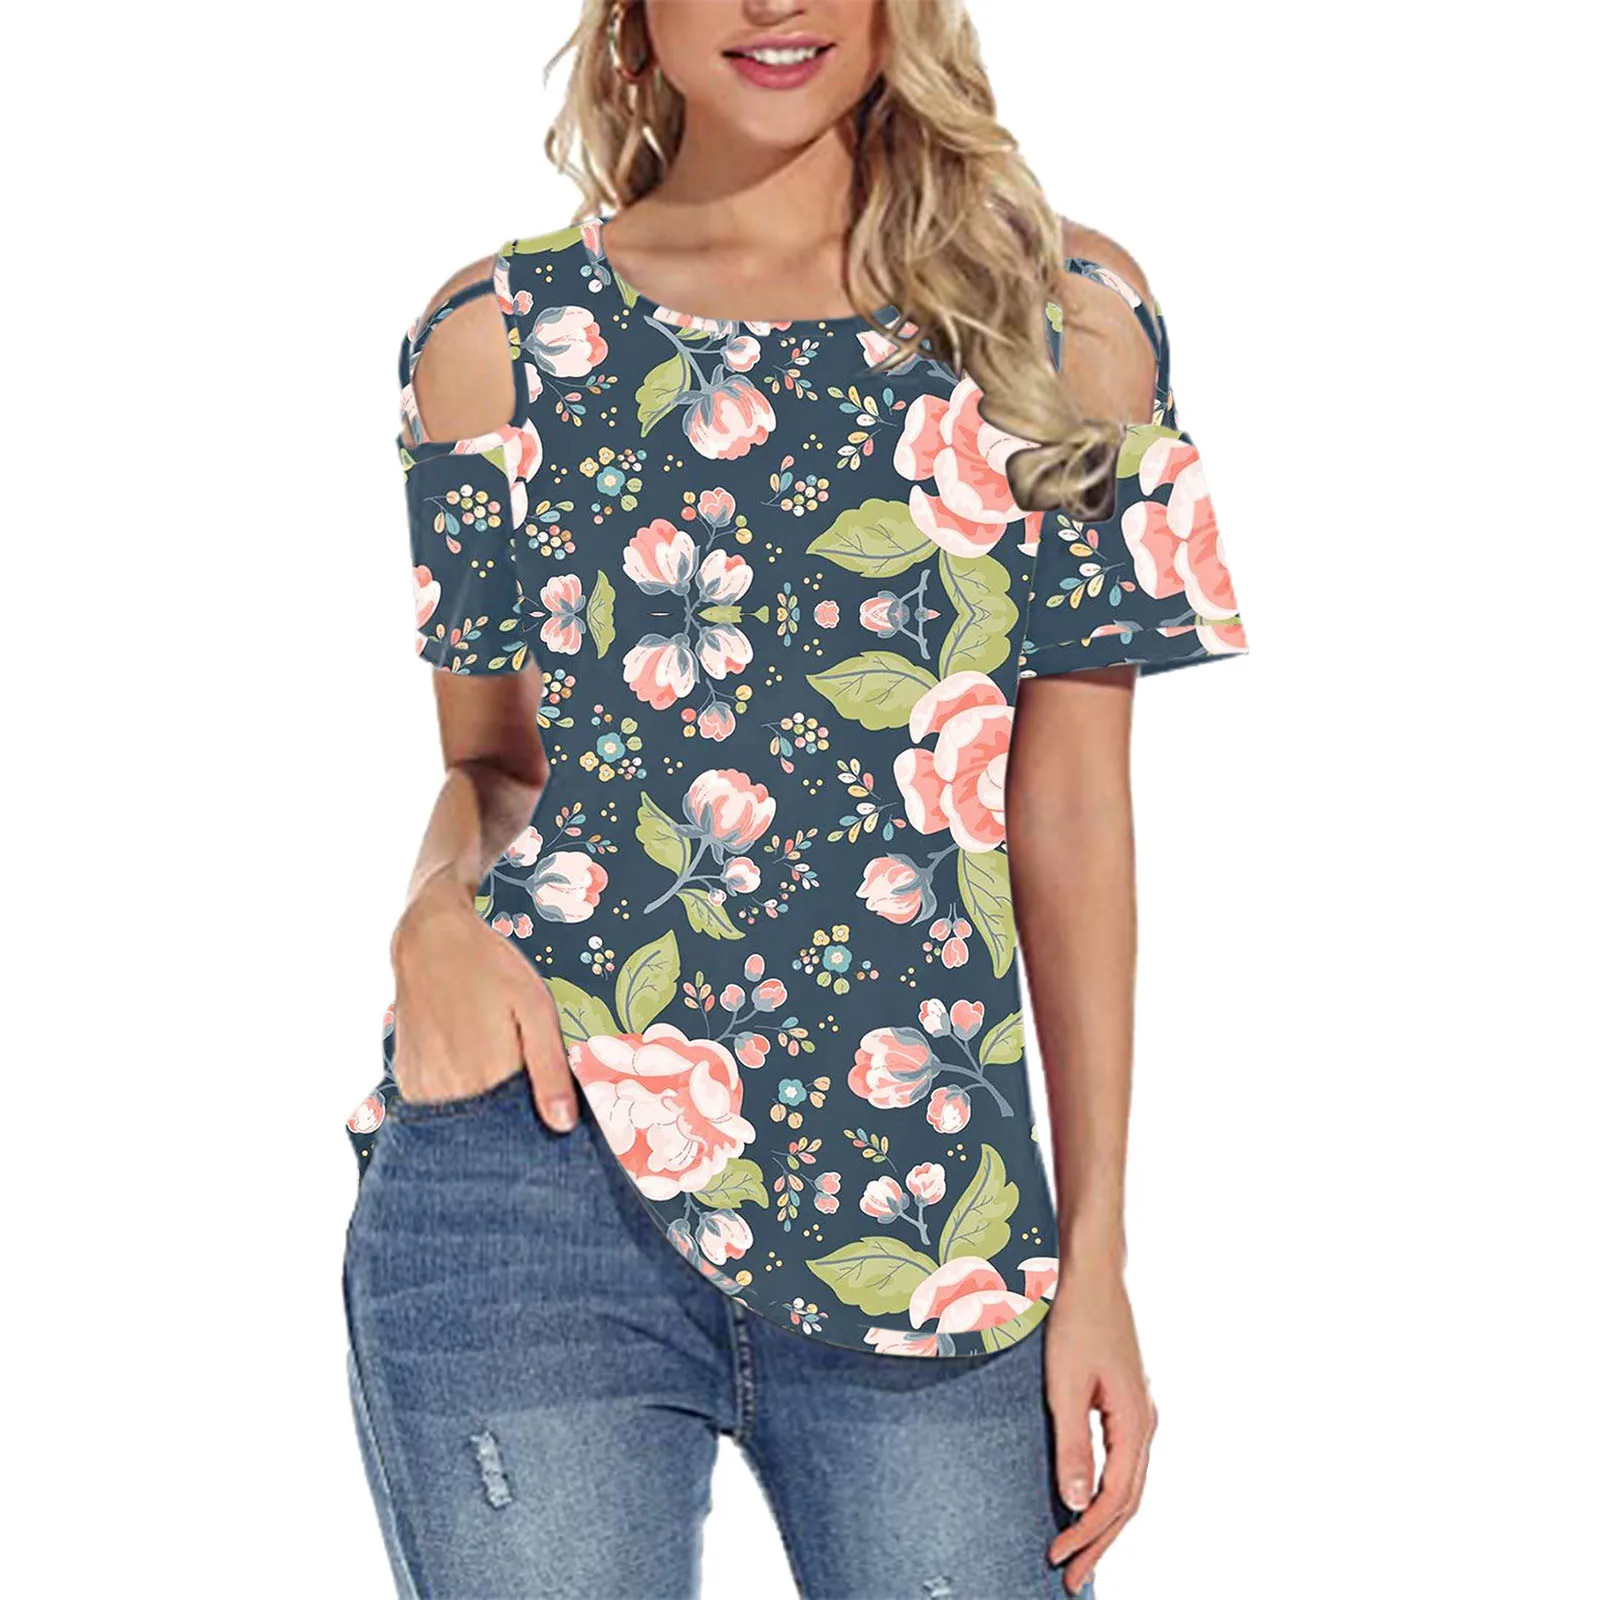 

Printed Plus Size Tshirts Women Floral Printe Short Sleeve Strappy Cold Shoulder T-Shirt Tops Blouses Female Summer Clothes